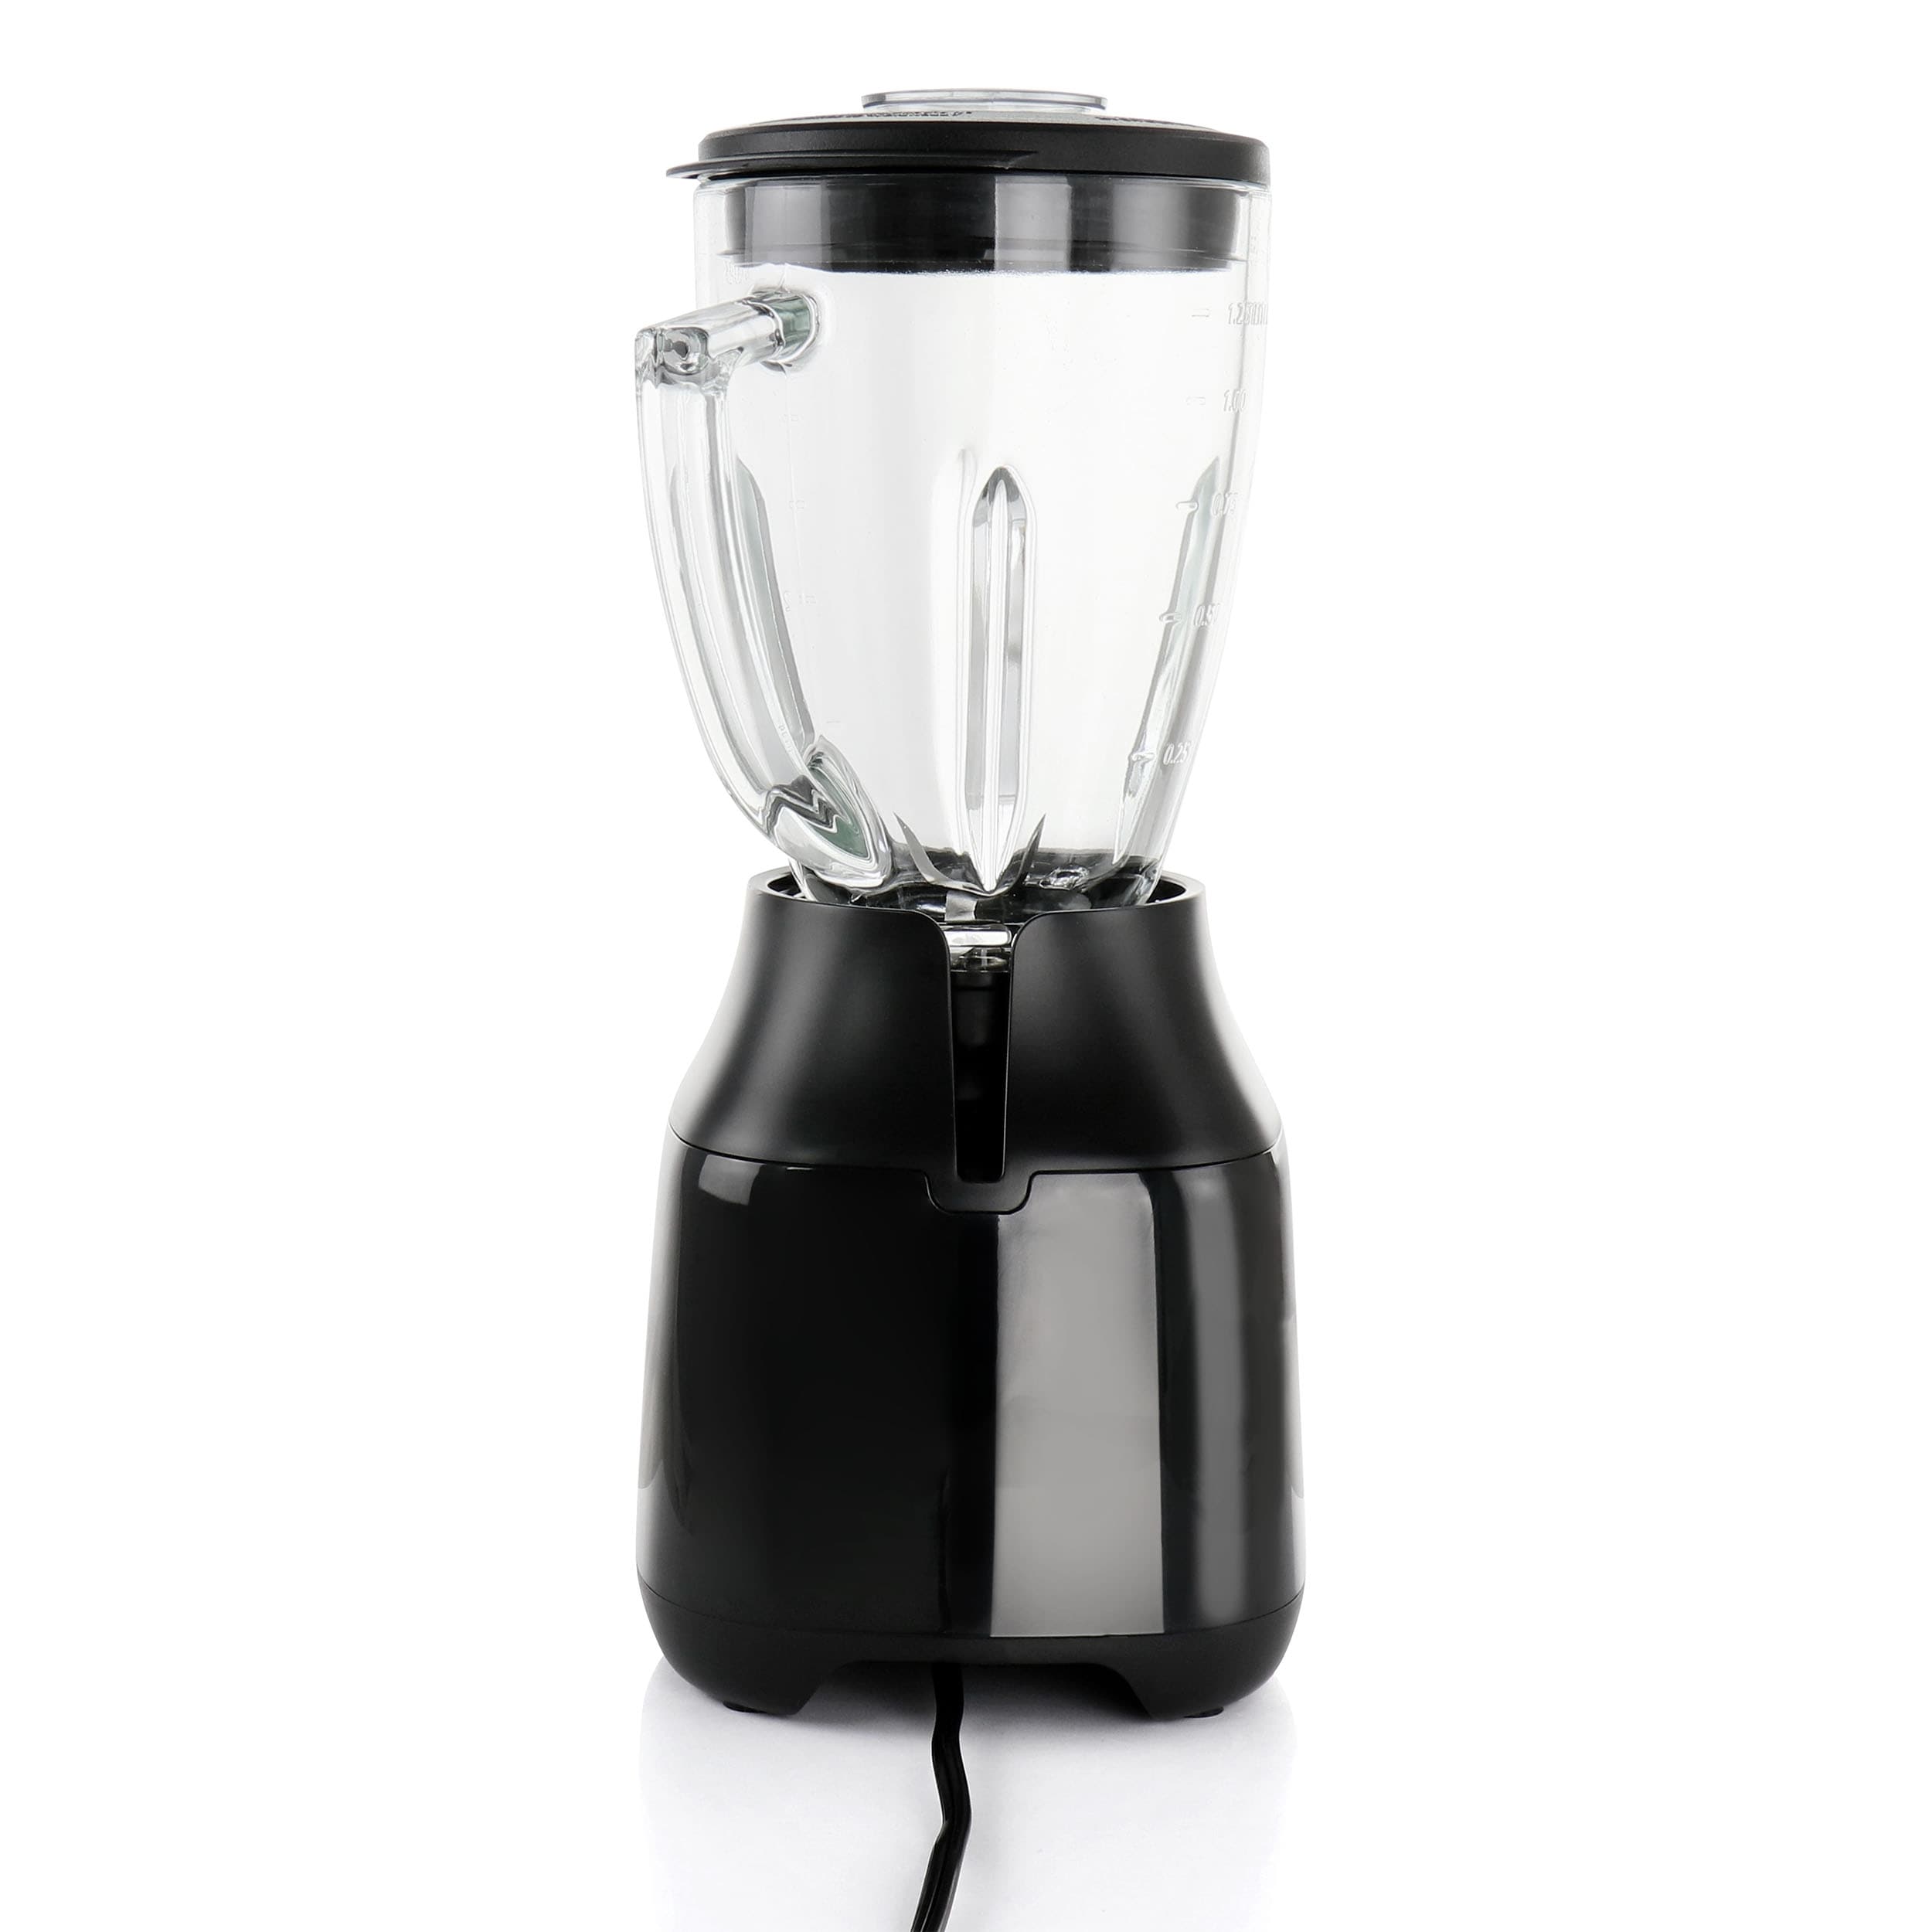 https://ak1.ostkcdn.com/images/products/is/images/direct/60b2393ba6166d95b3b0aa10e4bf06a834dc9eef/Oster-800-Watt-6-Cup-One-Touch-Blender-with-Auto-Program.jpg